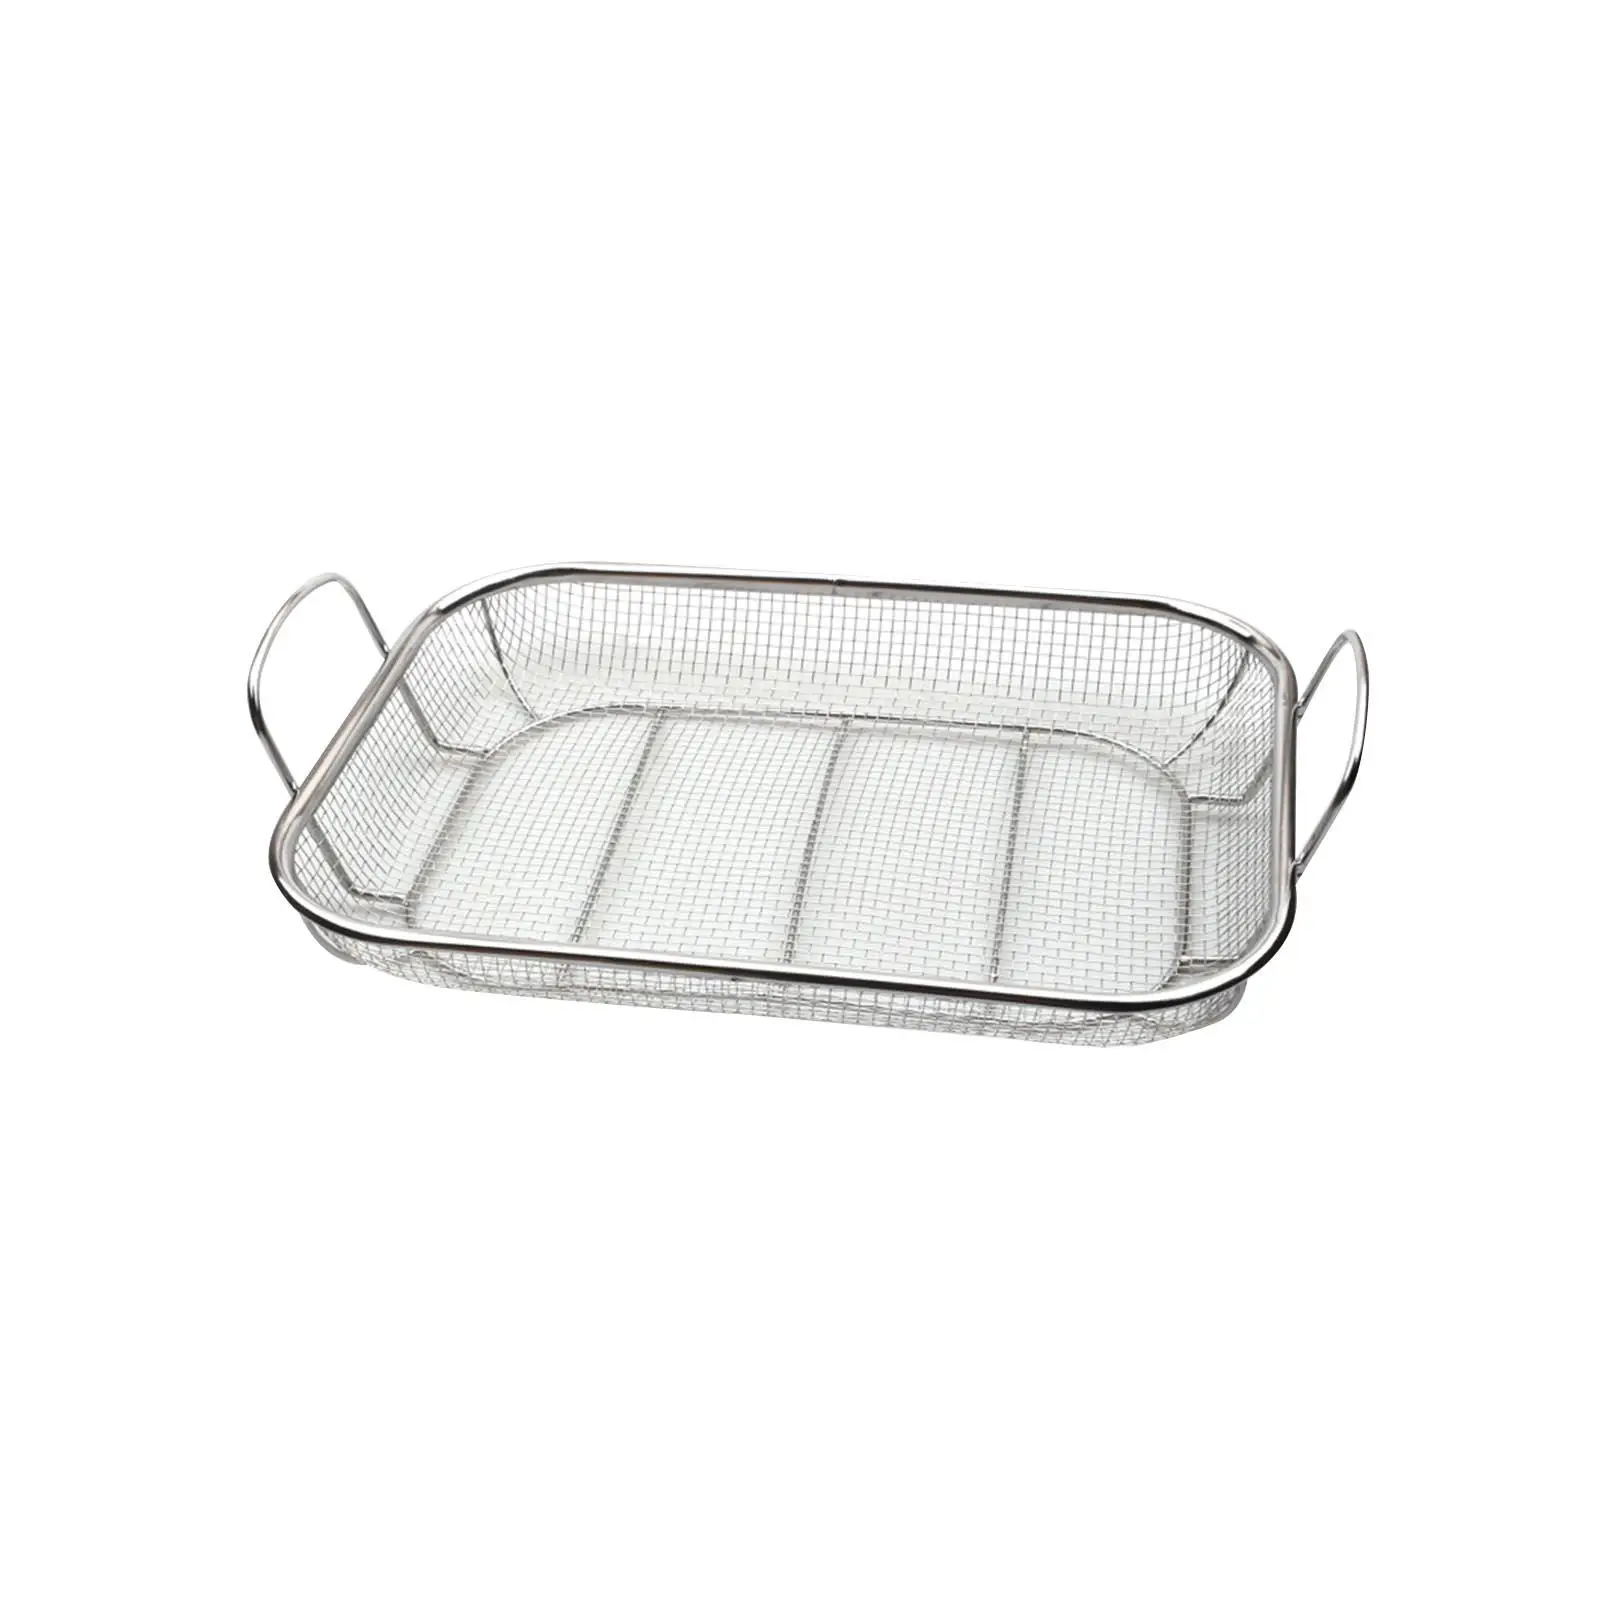 Vegetable Barbecue Basket Grill Basket Multifunctional Grid Mesh Bottom Accessories Roasting Pan with Two Handles for Seafood